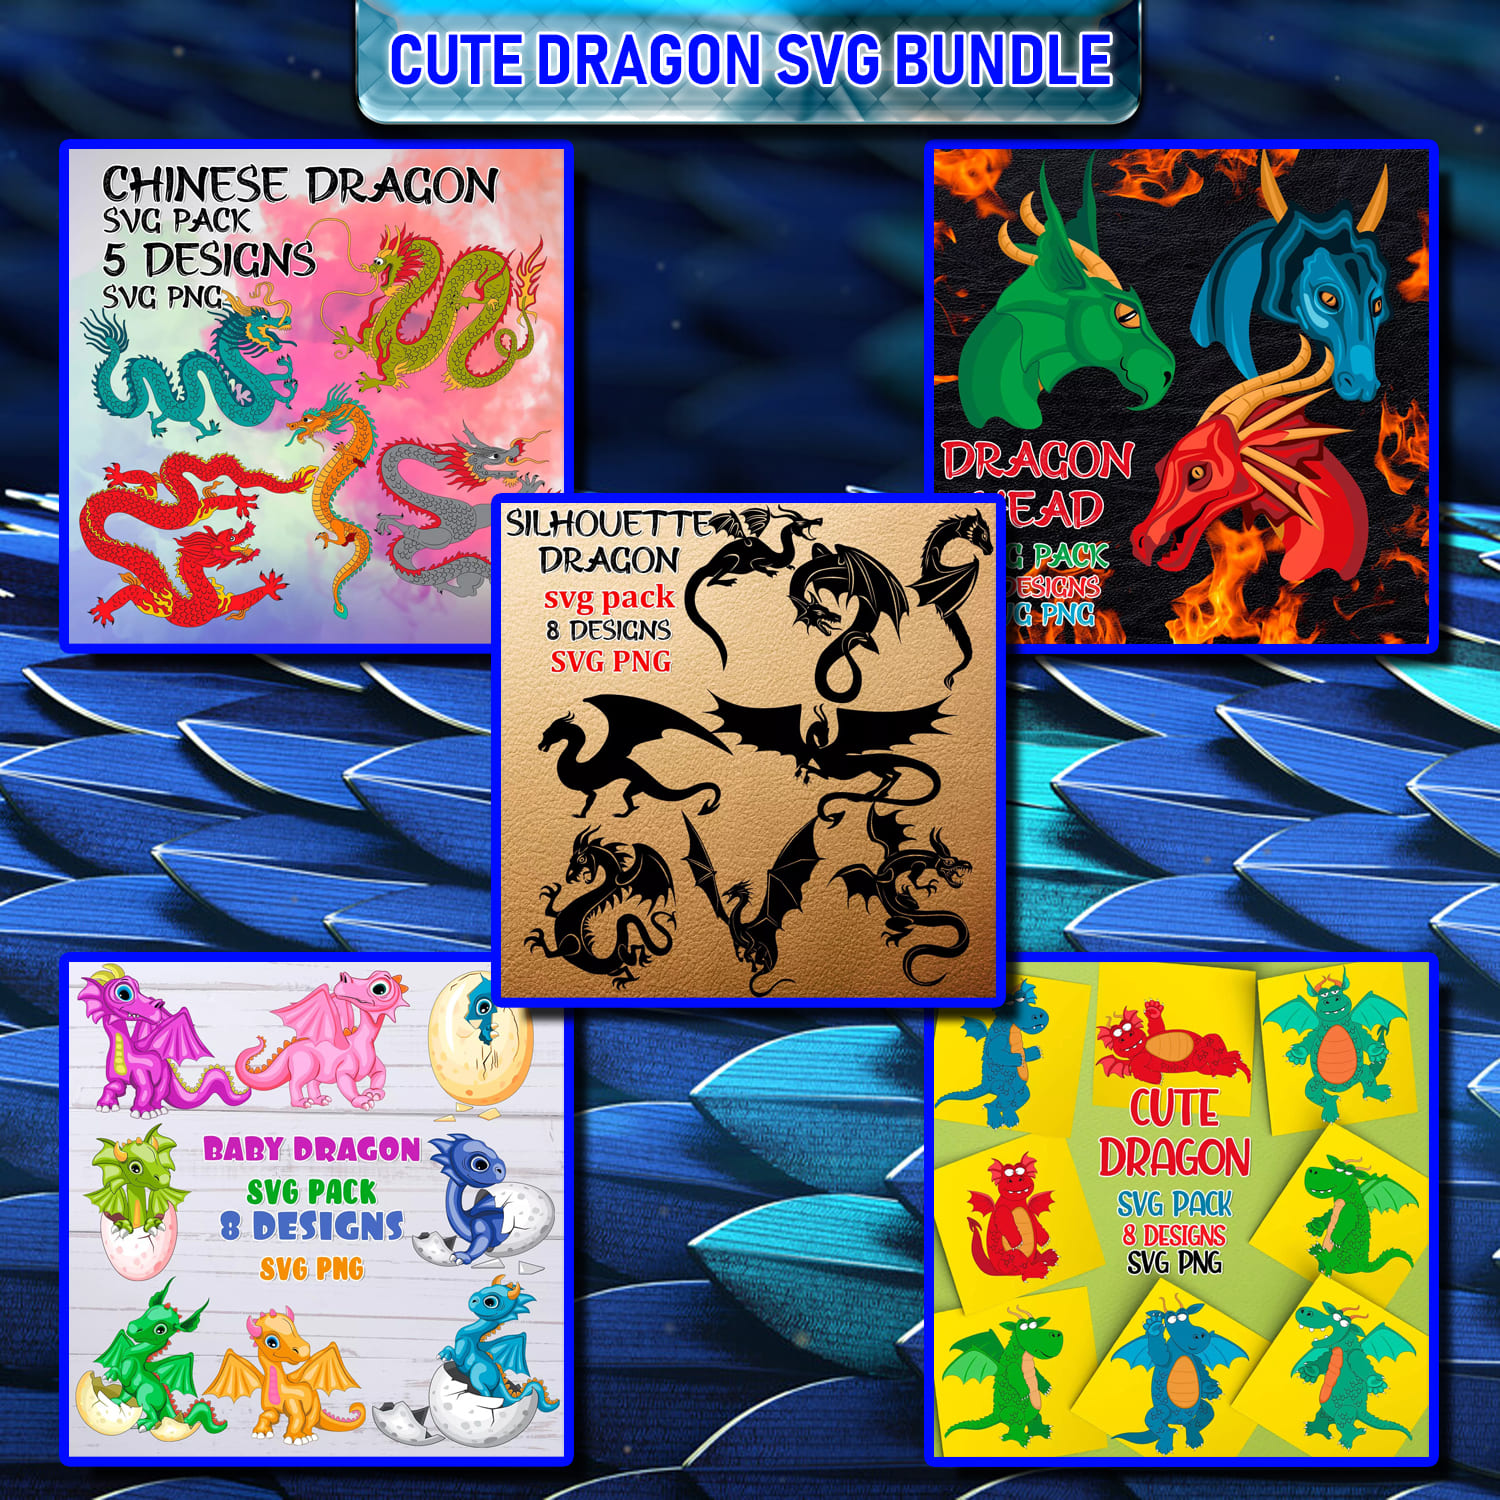 Collage of different dragon images on a blue background.